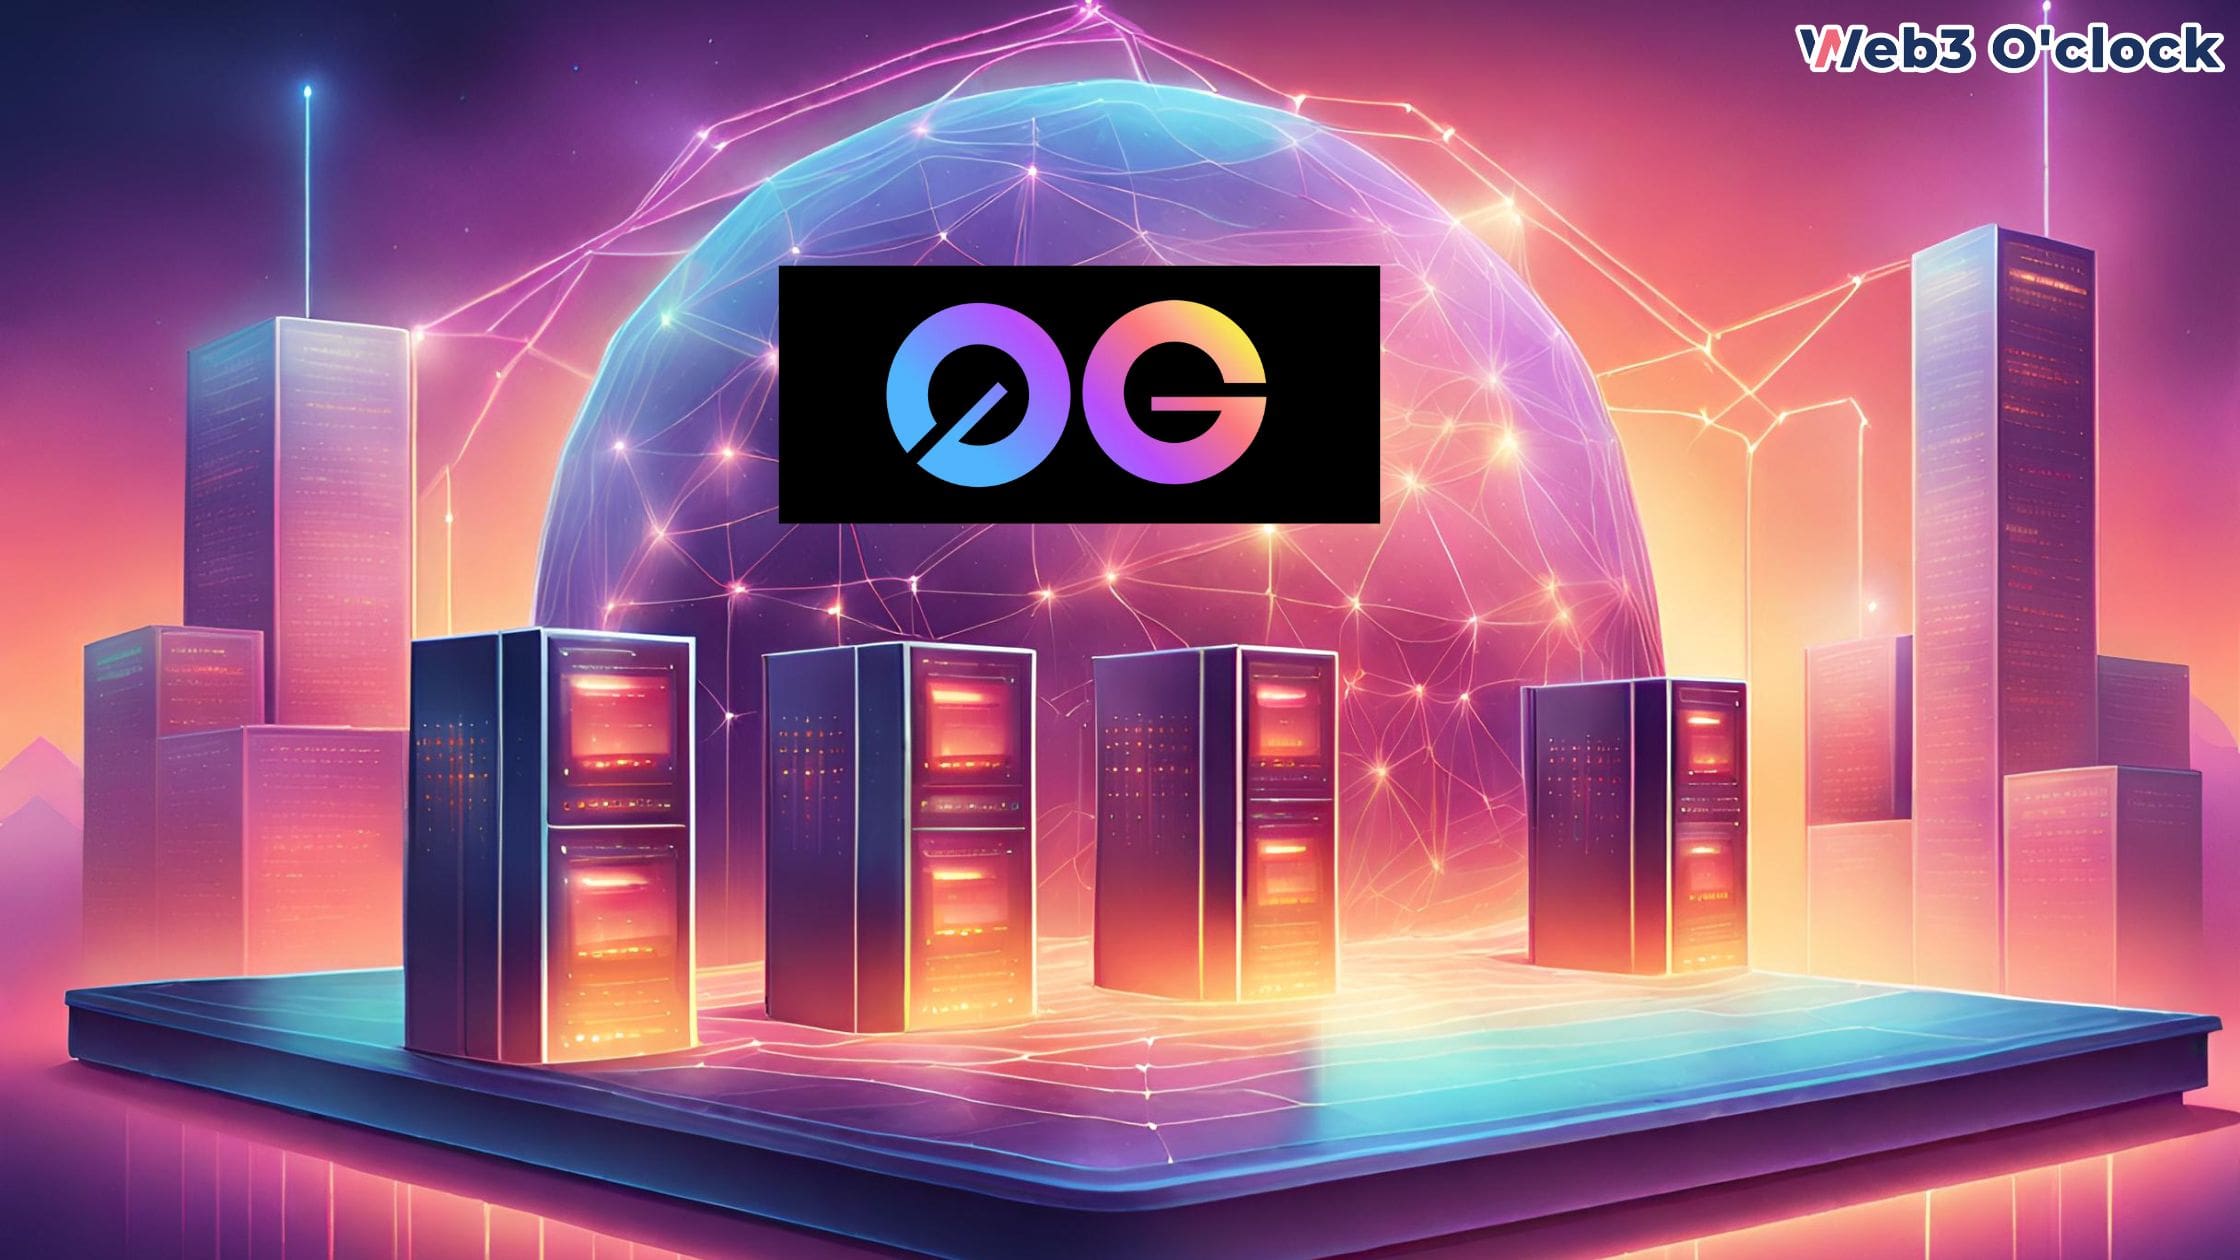 0G Labs Secures Pre-seed Funding by Web3 O'clock